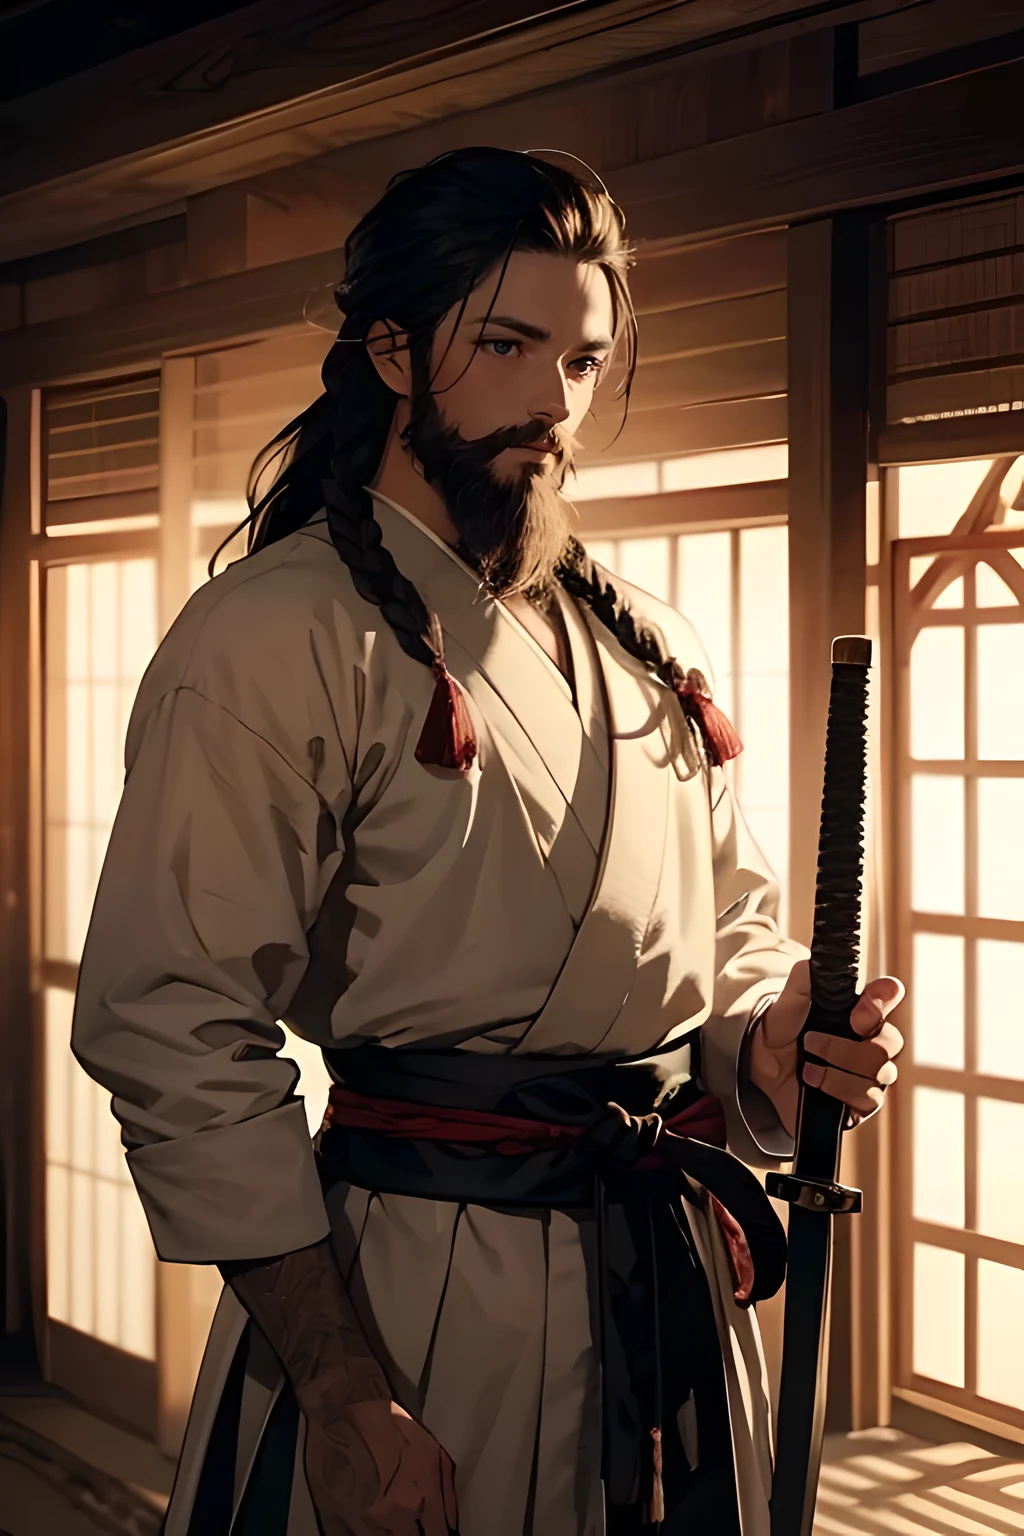 (masterpiece), (best quality), 1male, beard, long tied hair, holding long sword, samurai yoroi outfit, post apocalyptic, perfect shading, cinematic lighting, highly detailed, intricate details, HD 4K, extreme details, wide angle,